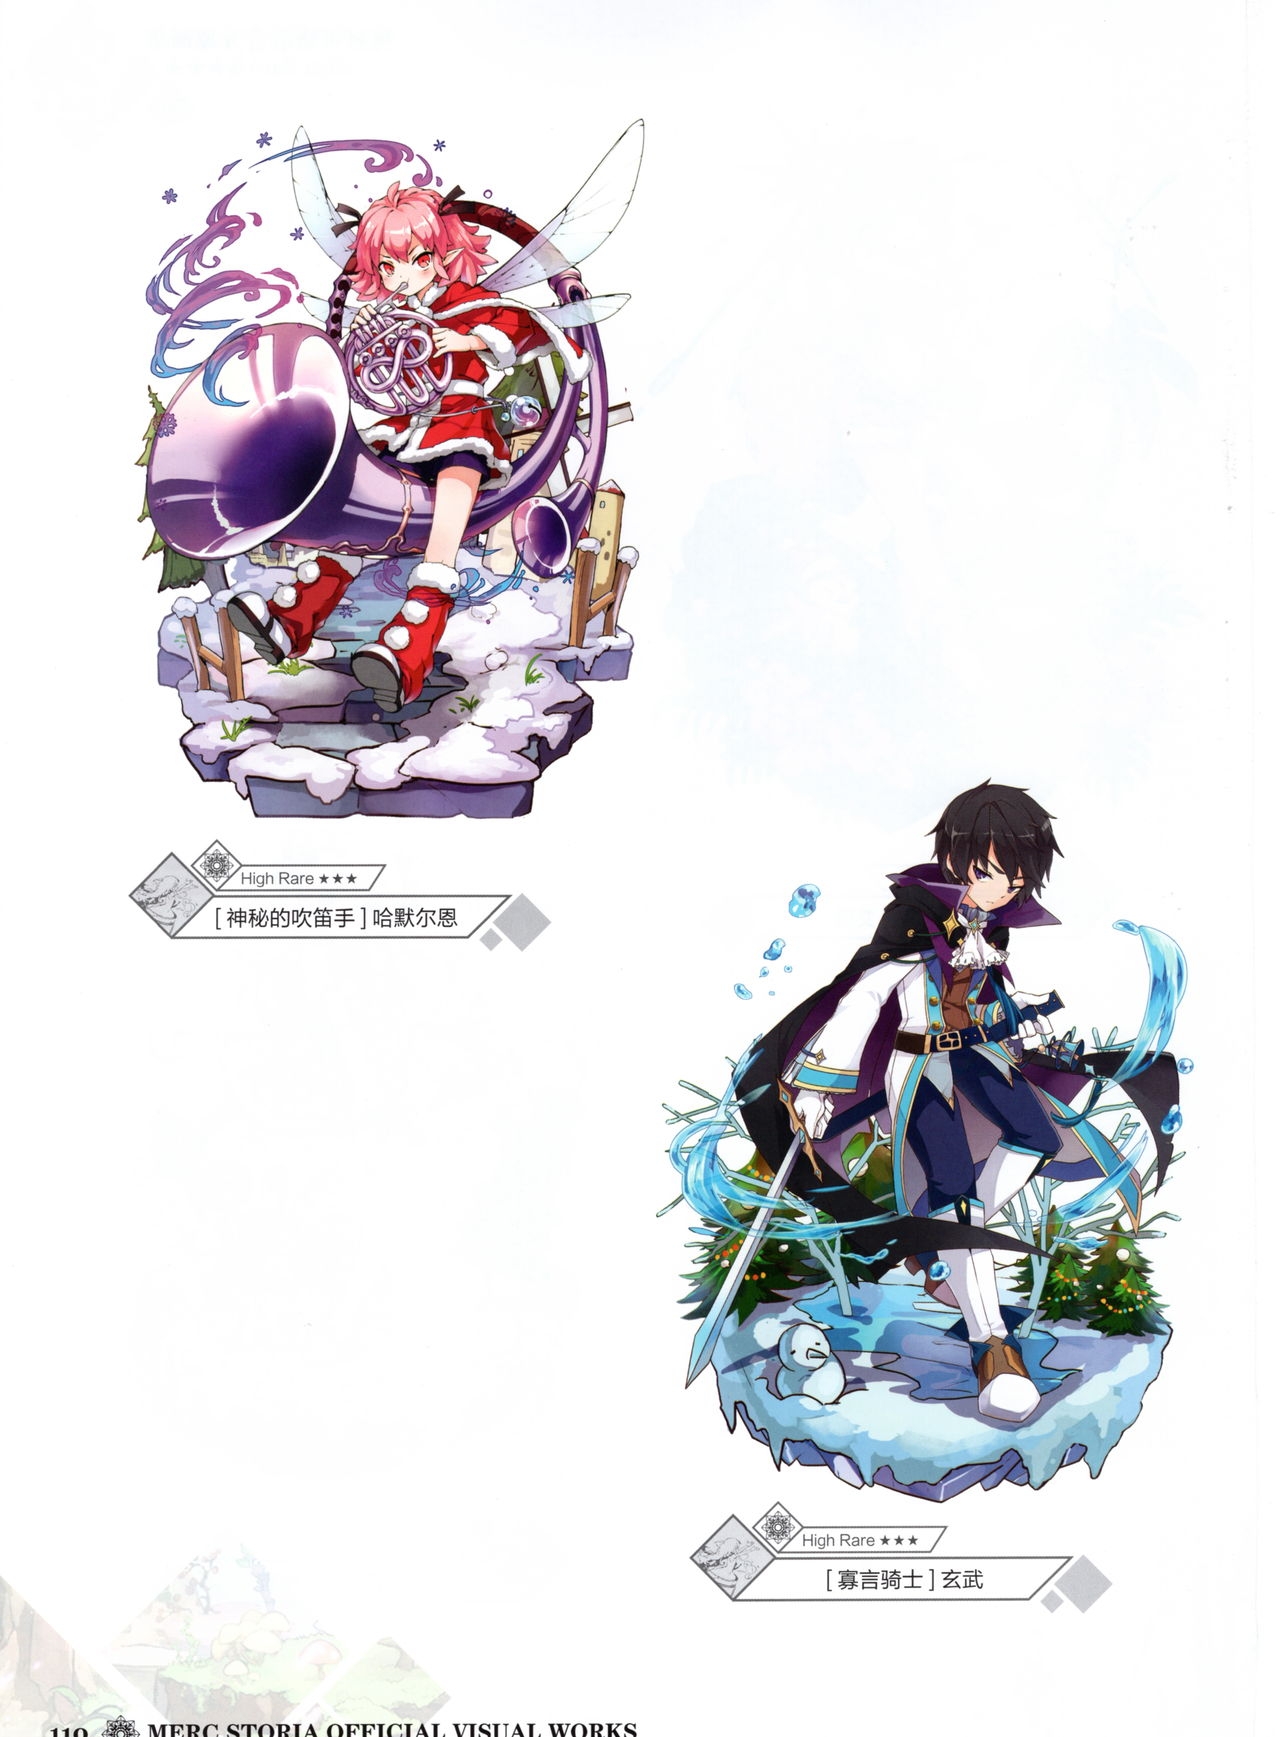 Merc Storia Official Visual Works [Chinese] 112